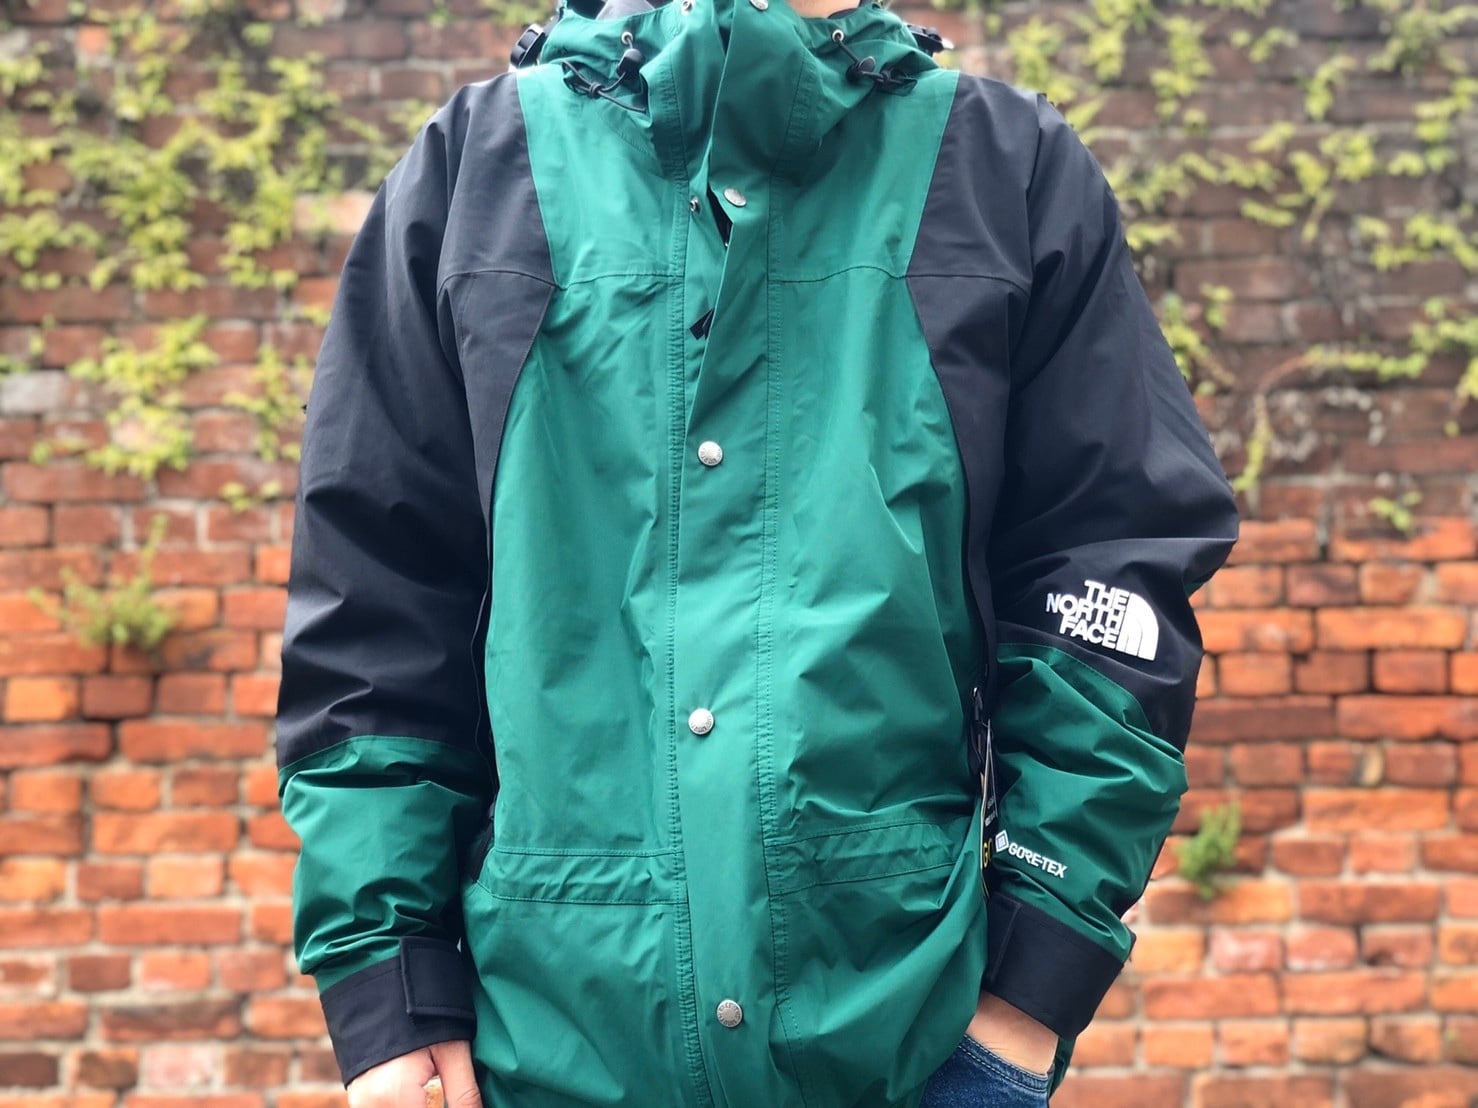 THE NORTH FACE 1994Mountain Light Jacket